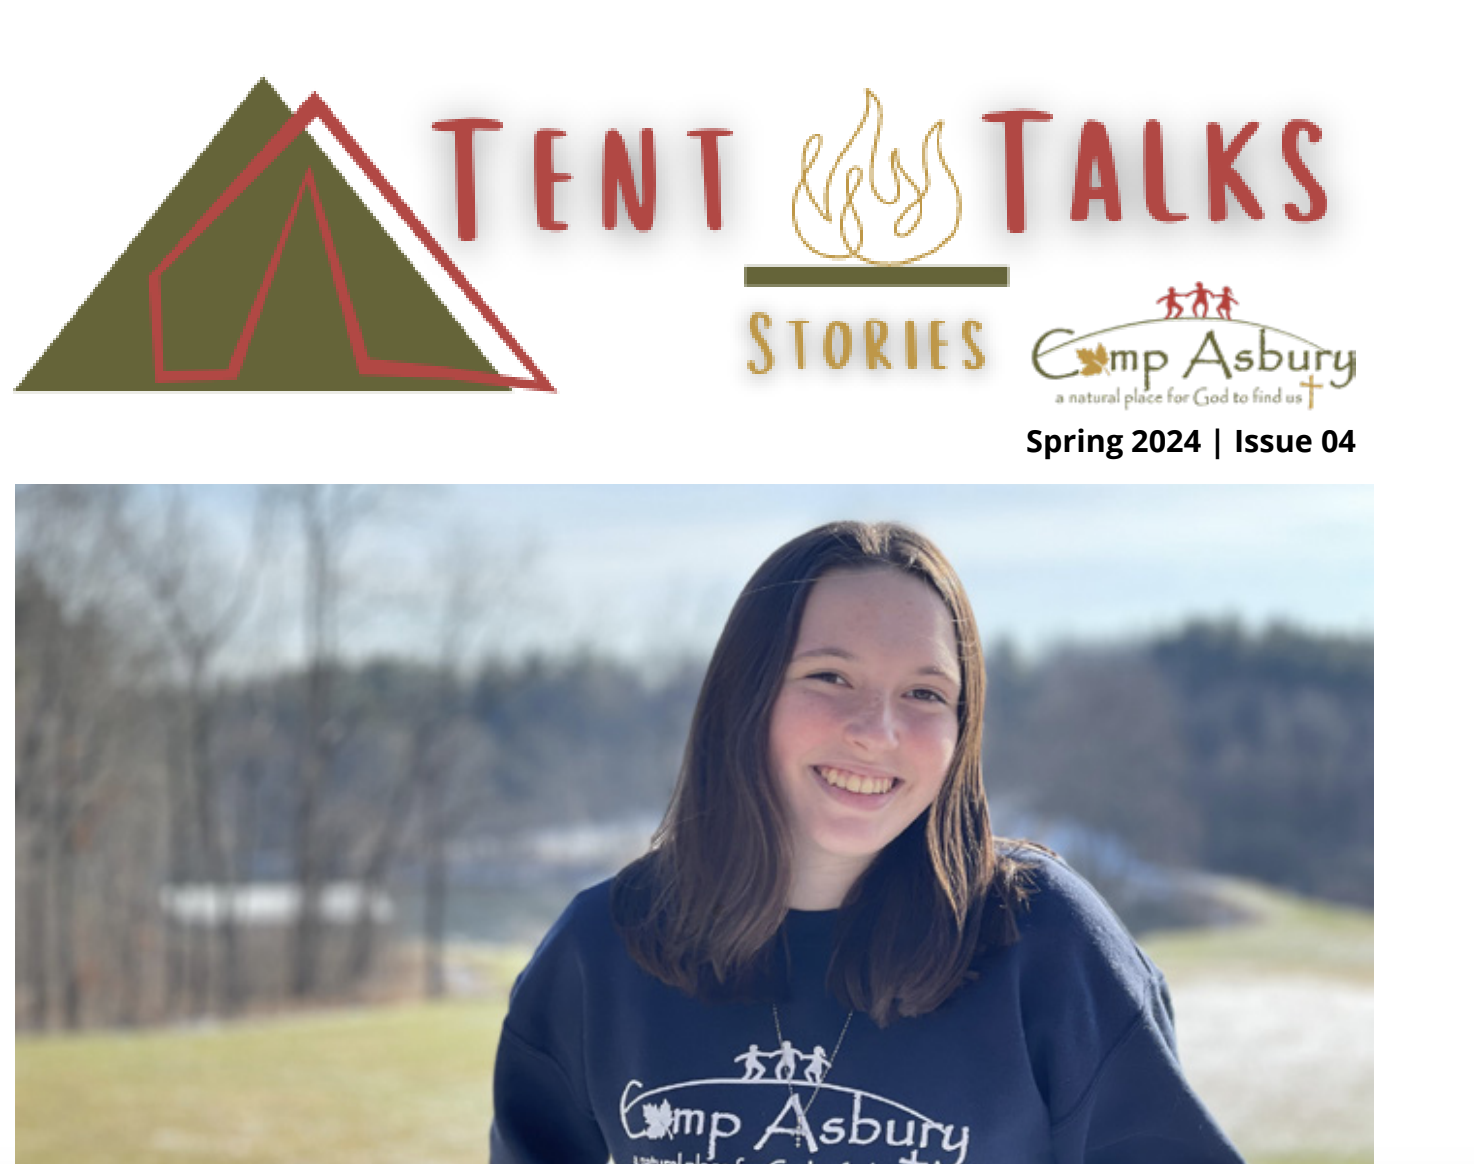 Tent Talks newsletter from Camp Asbury